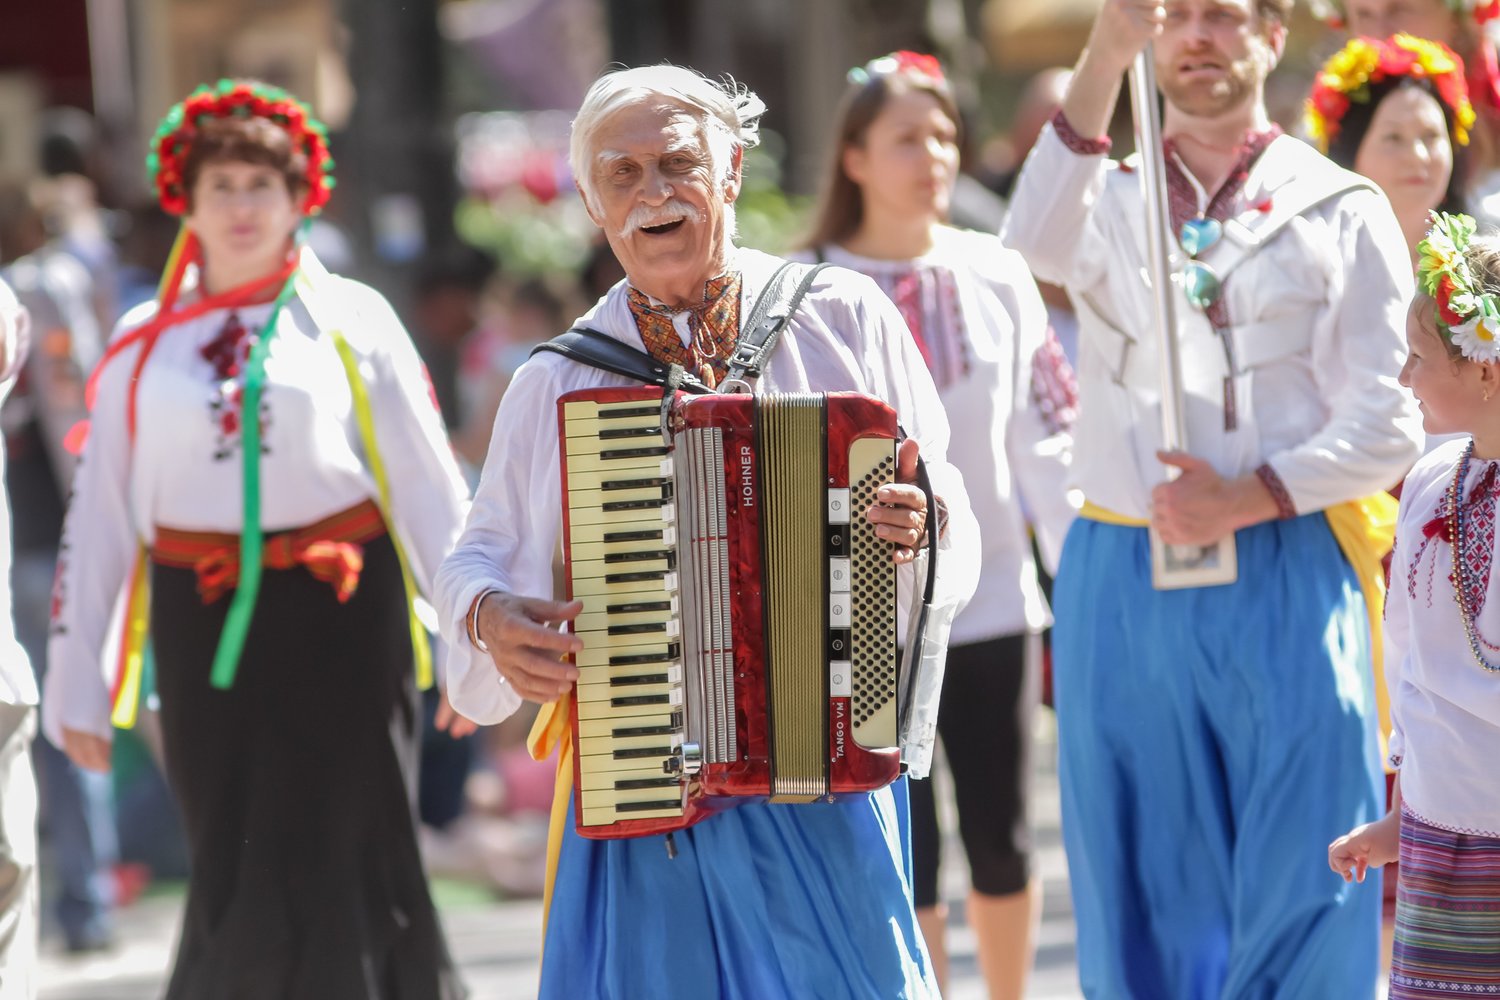 The International Folk Festival and its Parade Nation will return to downtown Fayetteville this Saturday and Sunday.